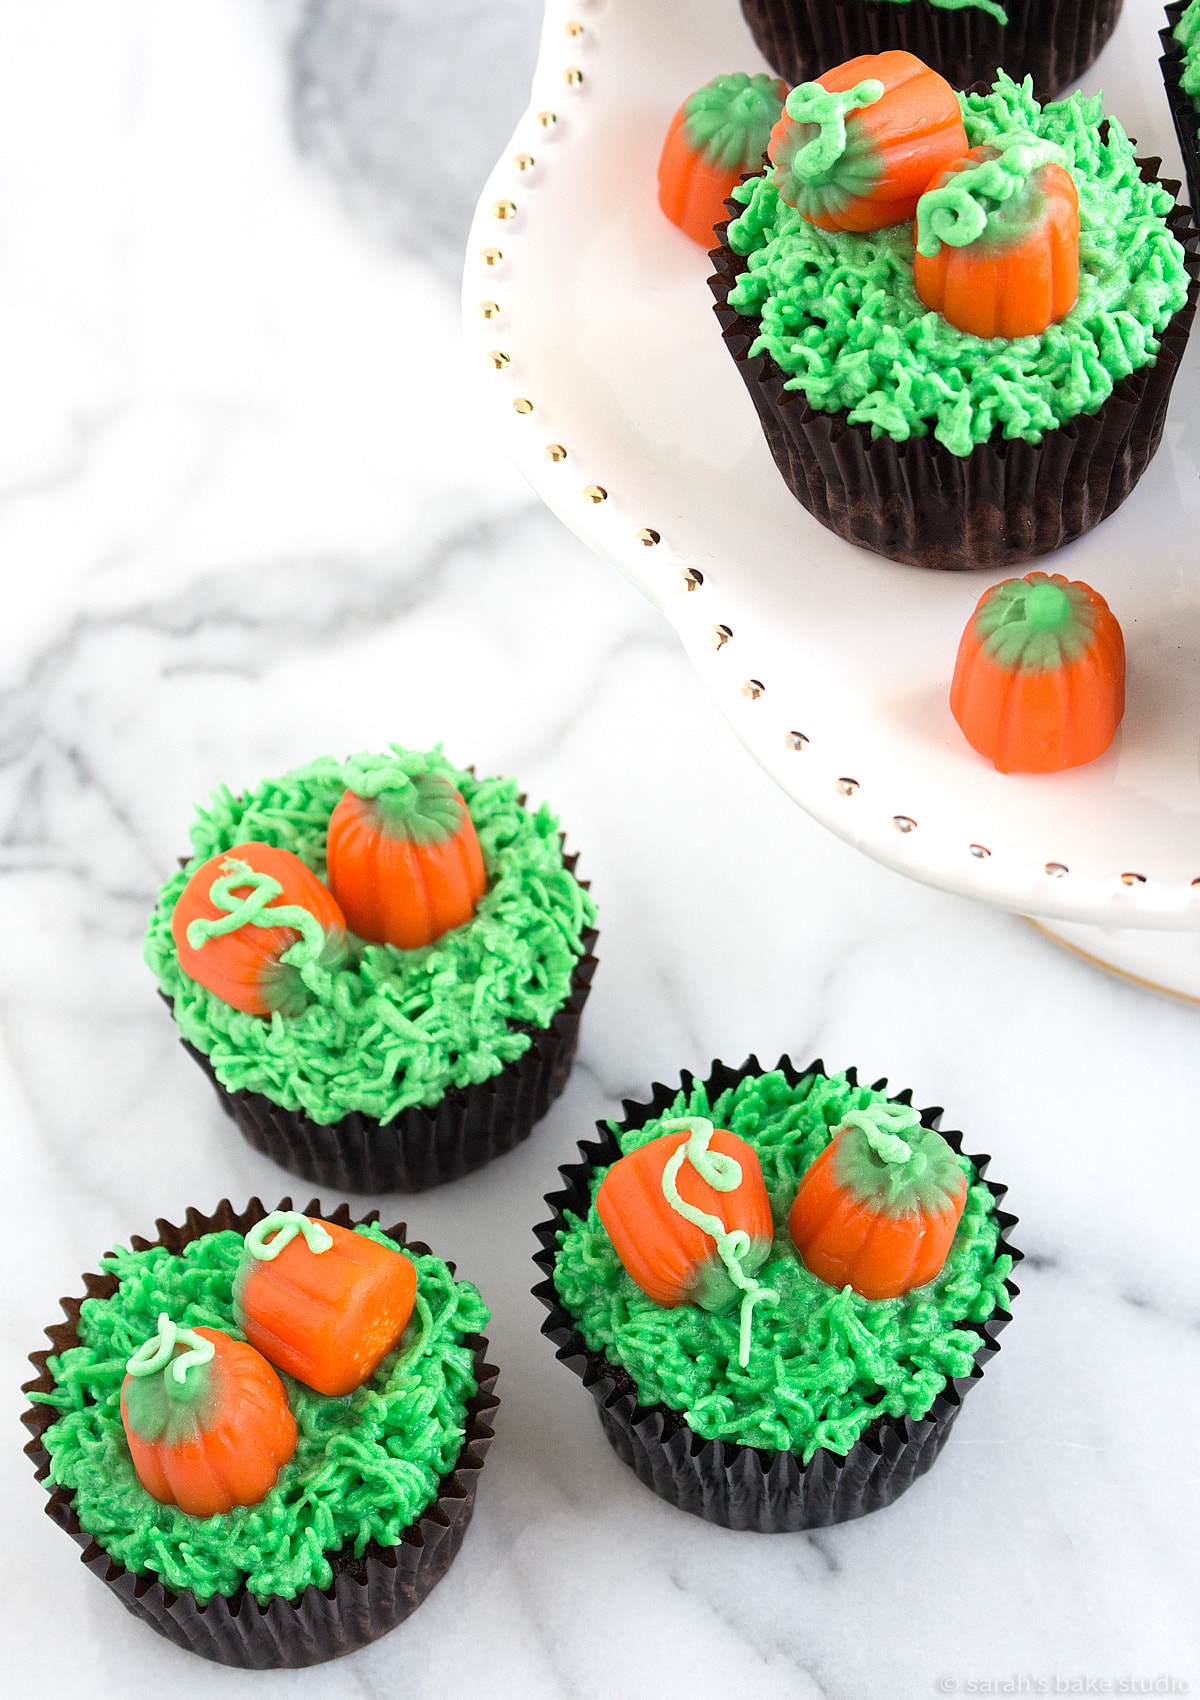 A top view of Pumpkin Patch Cupcakes.